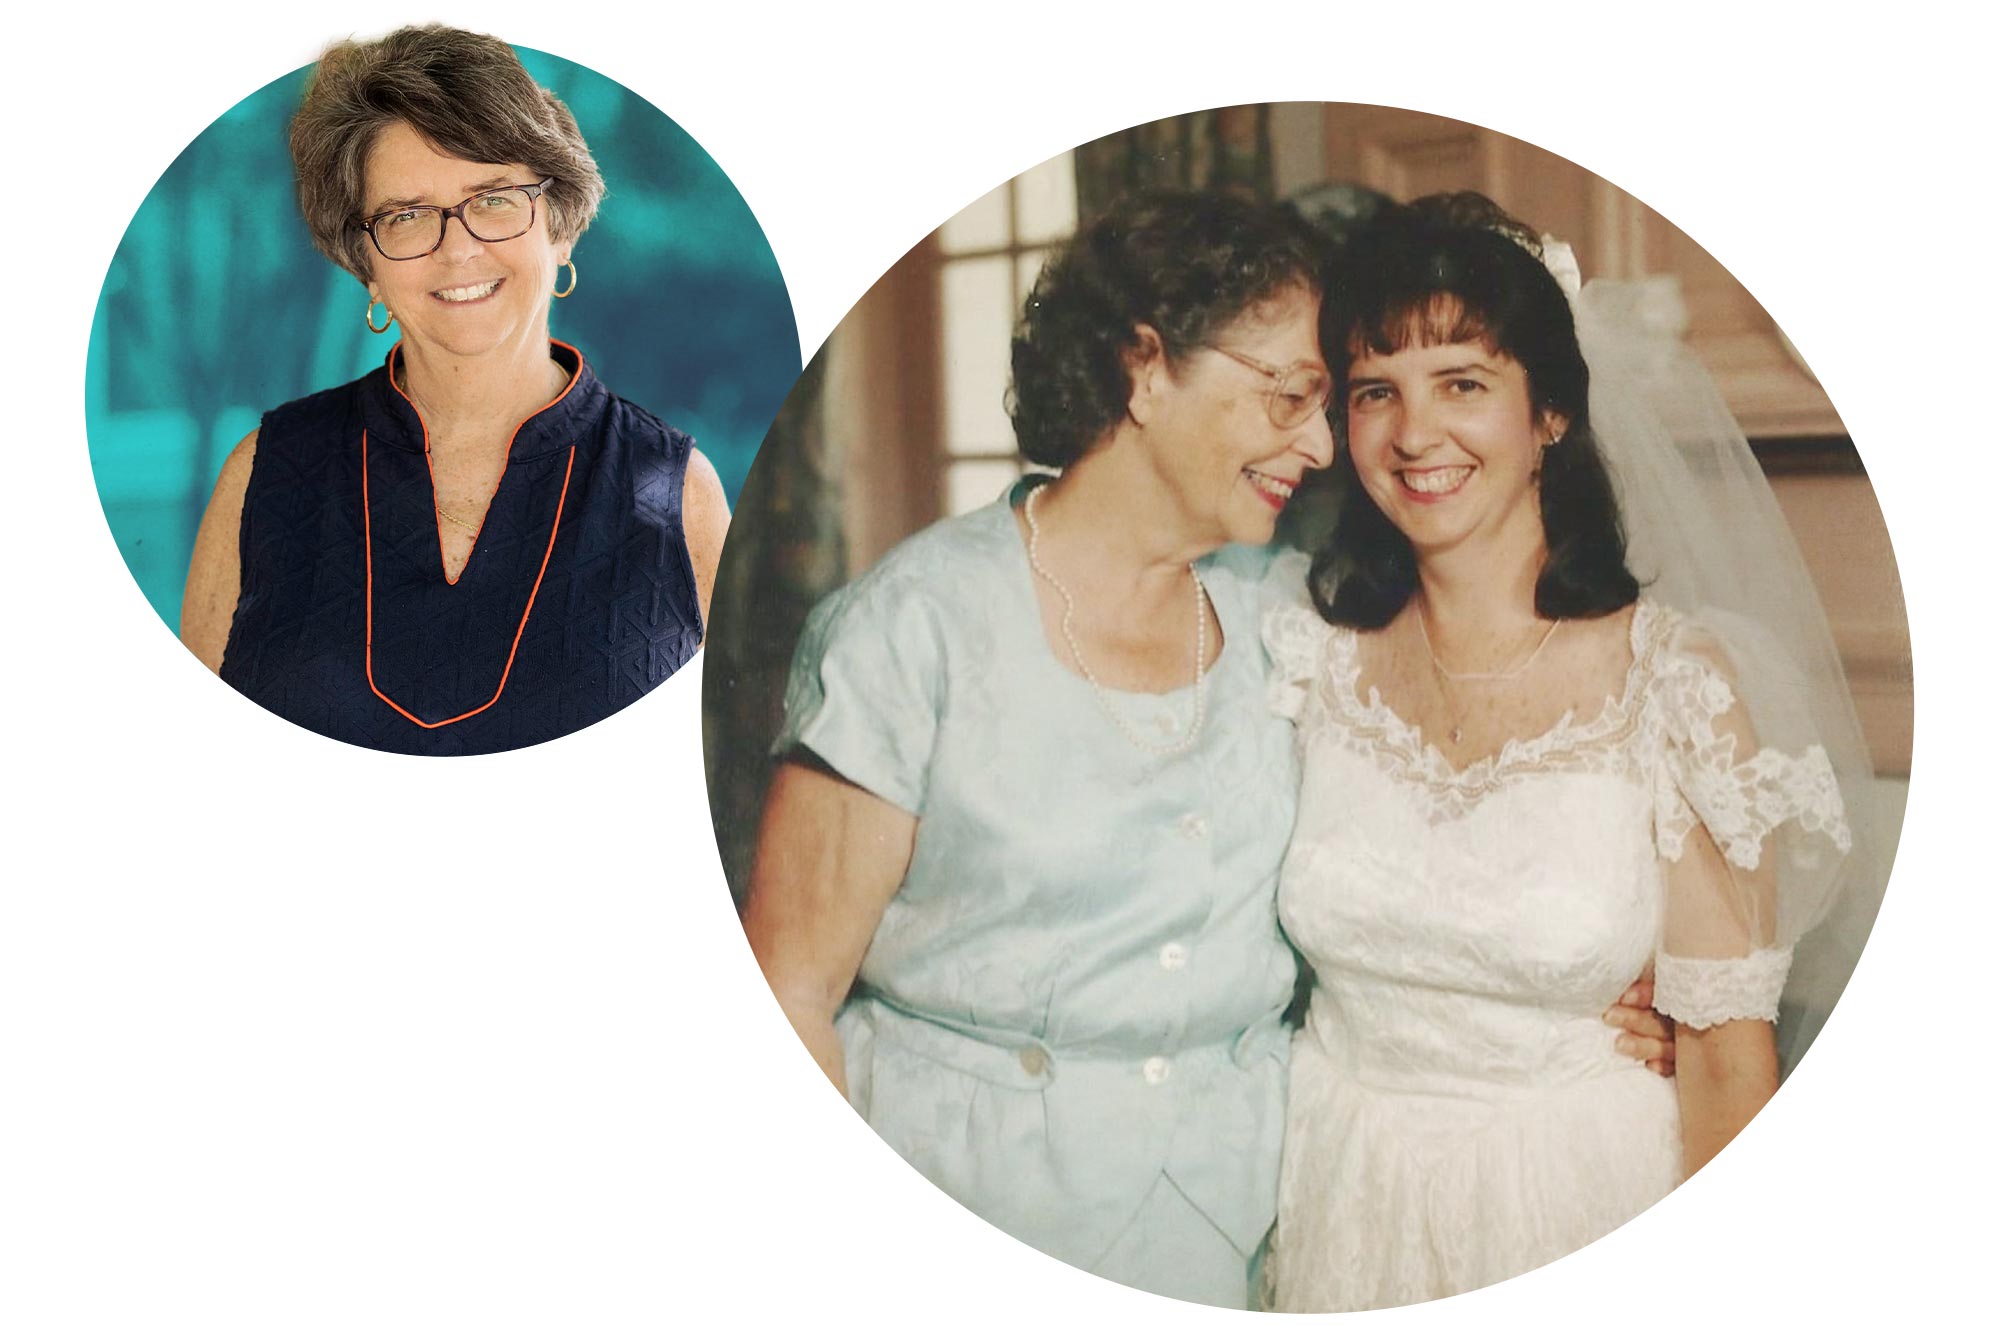 A portrait of Theresa Carroll, and a photo of her smiling in a wedding dress, with her mother's face resting on her temple.